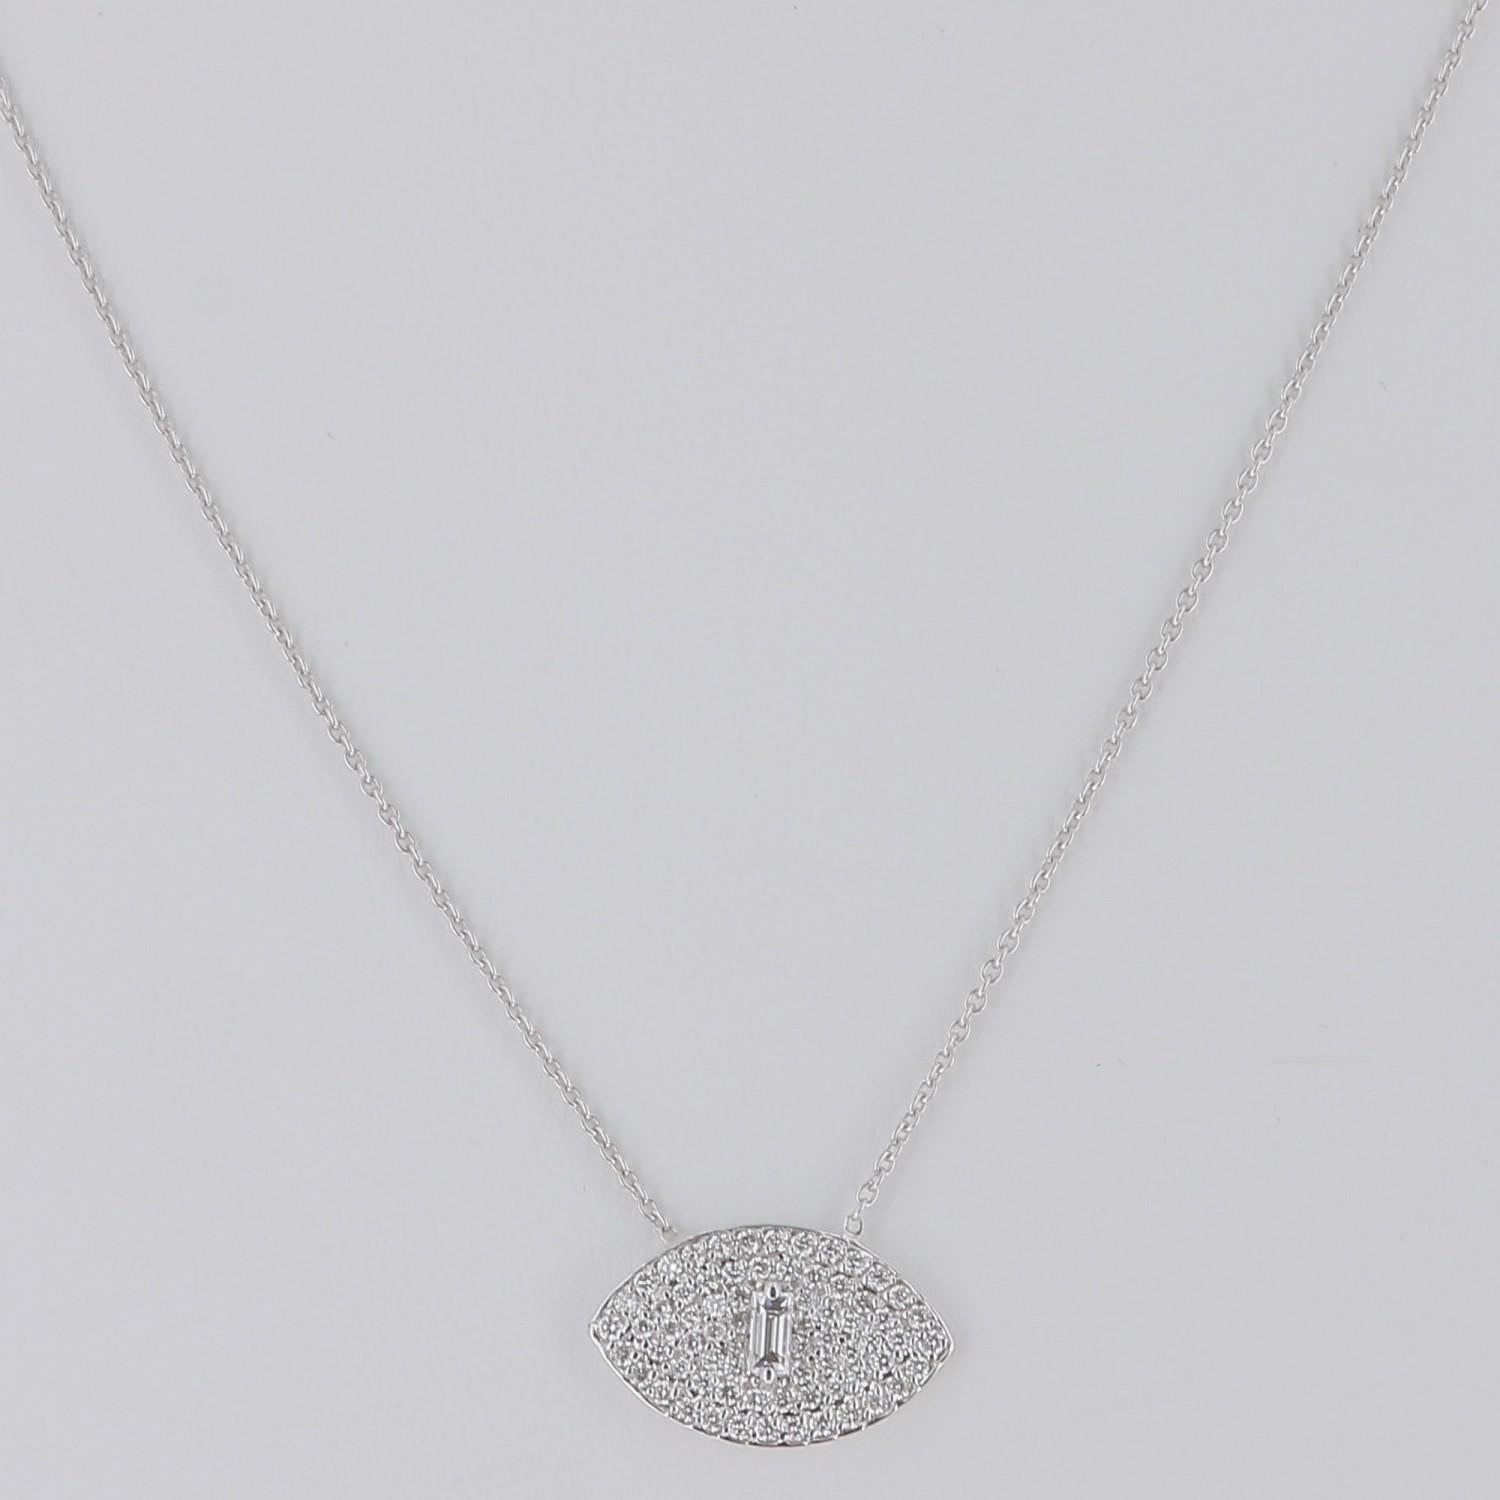 The diamond Pendant necklace is shape as an eye, totally paved by diamonds weighing 0,50 carats suspended from a chain of 40 cm.
The Eye necklace is set with one baguette diamond weighing 0.10 Carat and round diamonds weighing 0.40 Carat.
The Chain